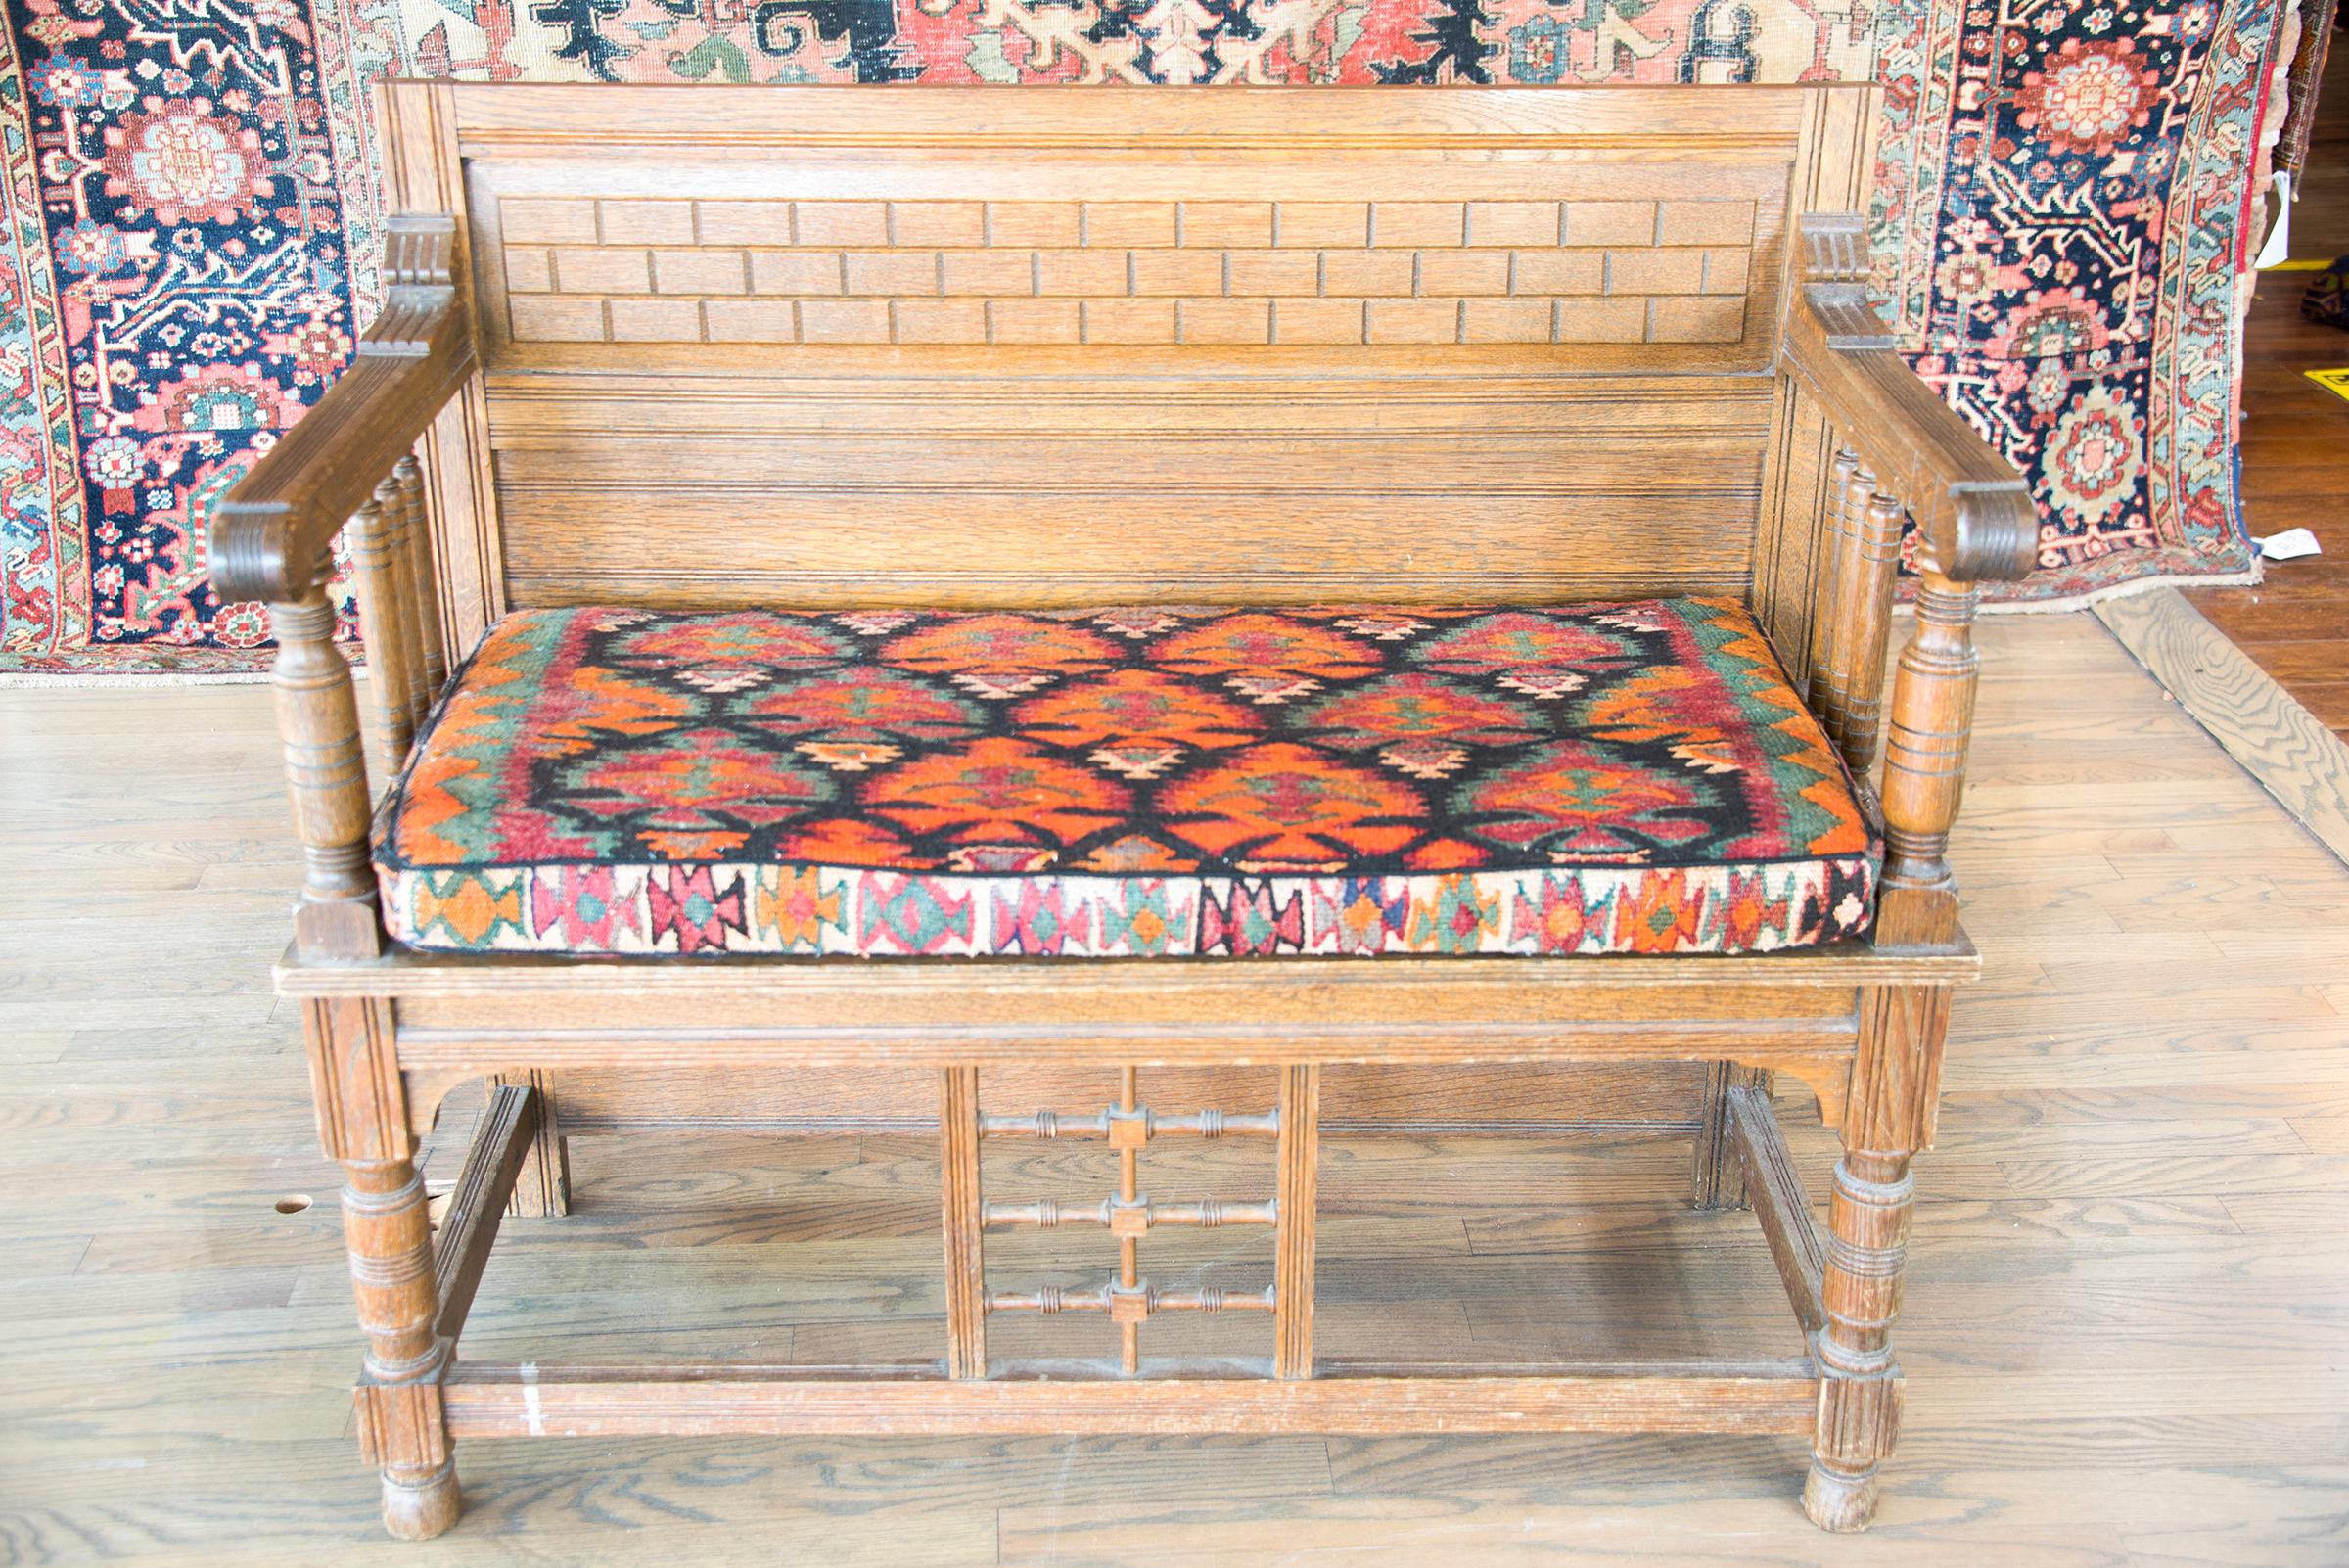 An early 20th century Danish oak bench with paneled back, turned arm supports and legs, with a newly upholstered seat cushion using a vintage Qazvin kilim rug with myriad stylized flowers woven in brilliant golds, turquoises, pinks, oranges, and